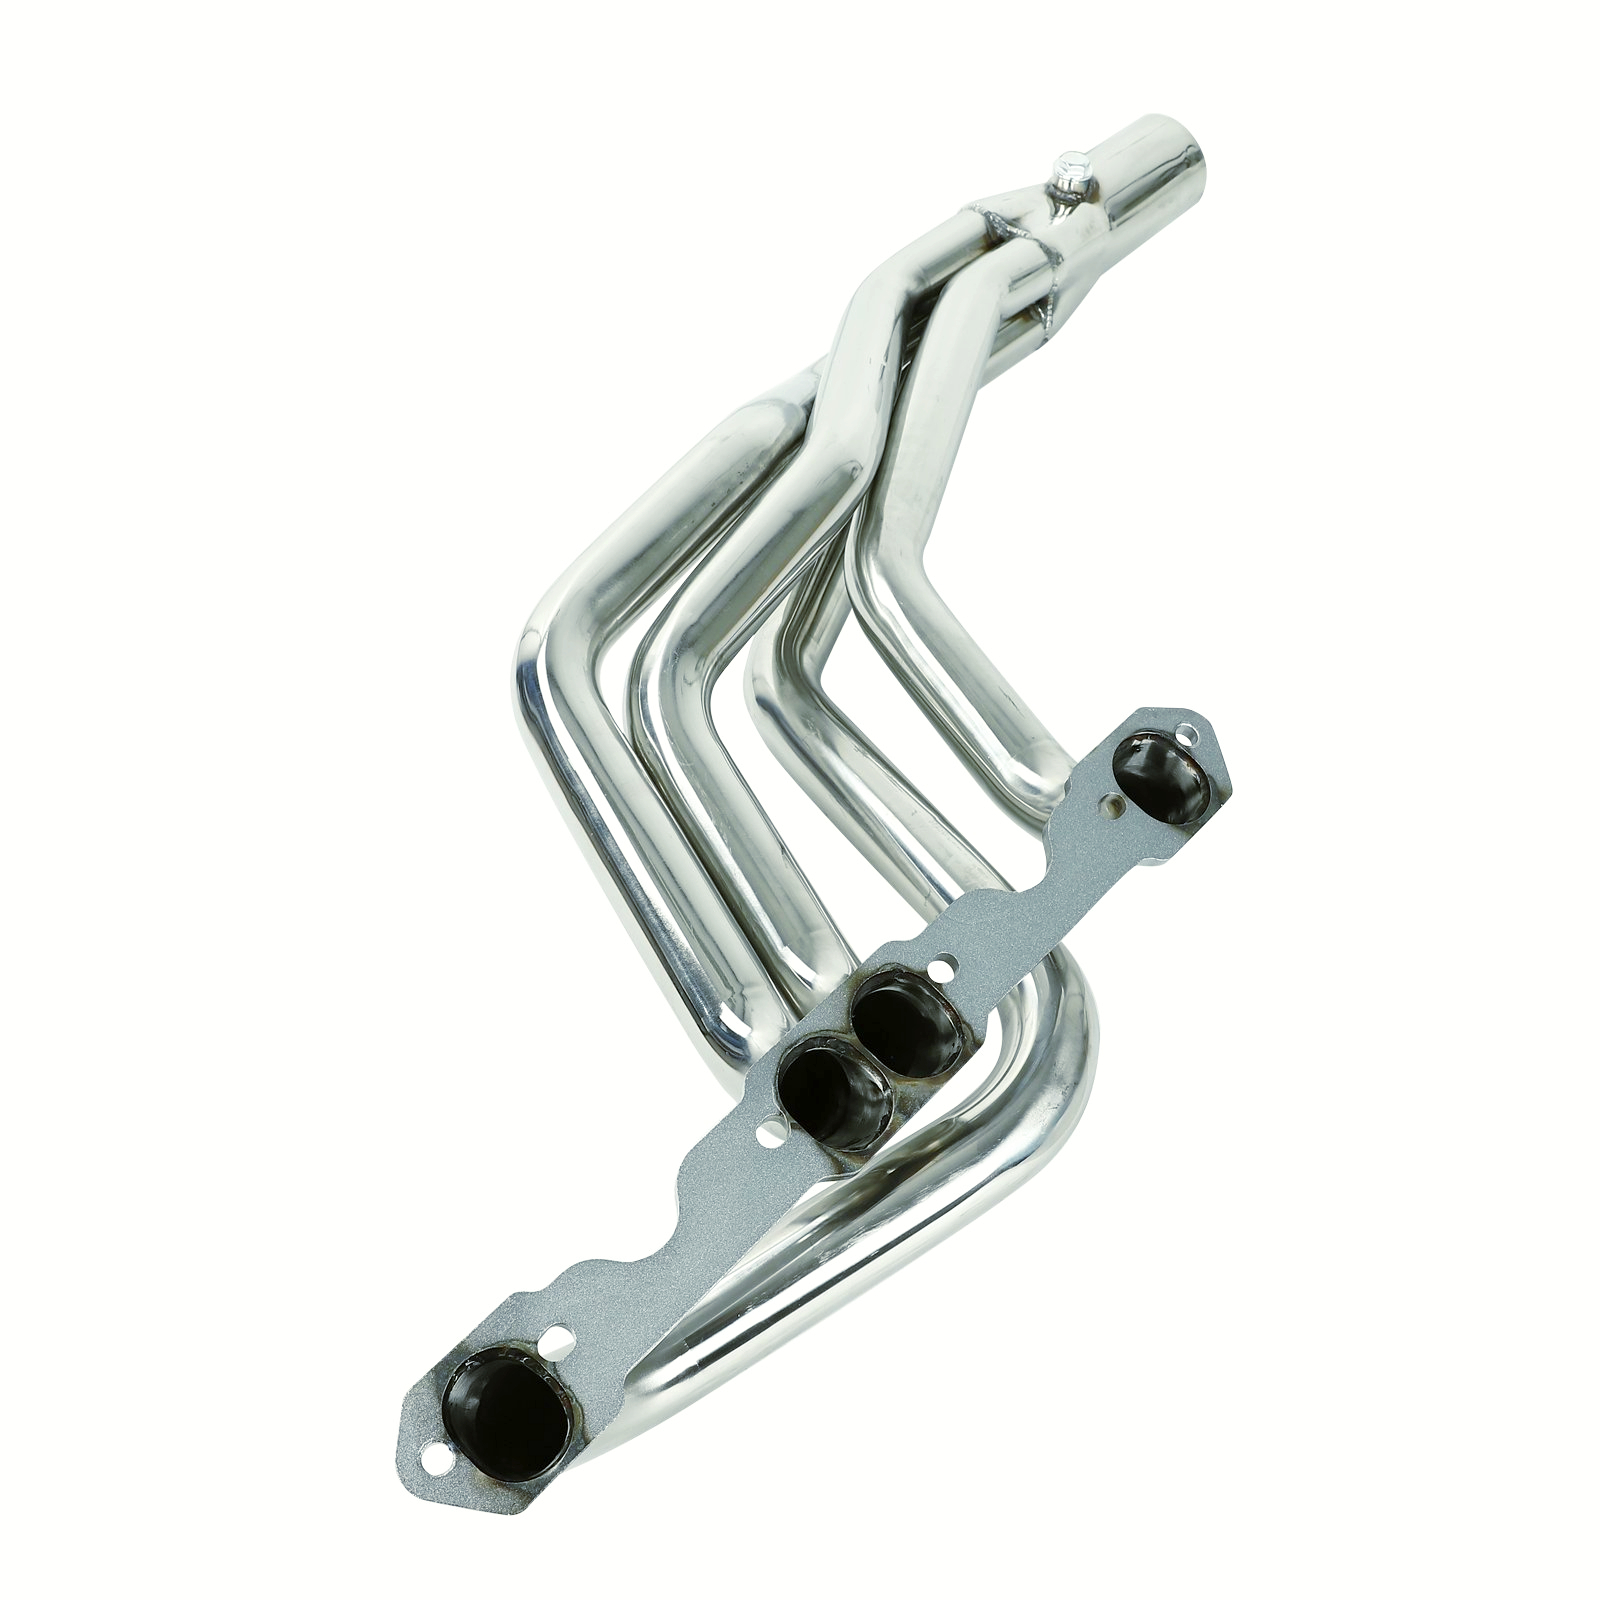 For 93-97 Chevy Camaro/Firebird 5.7L LT1 V8 Stainless Headers Exhaust Manifold